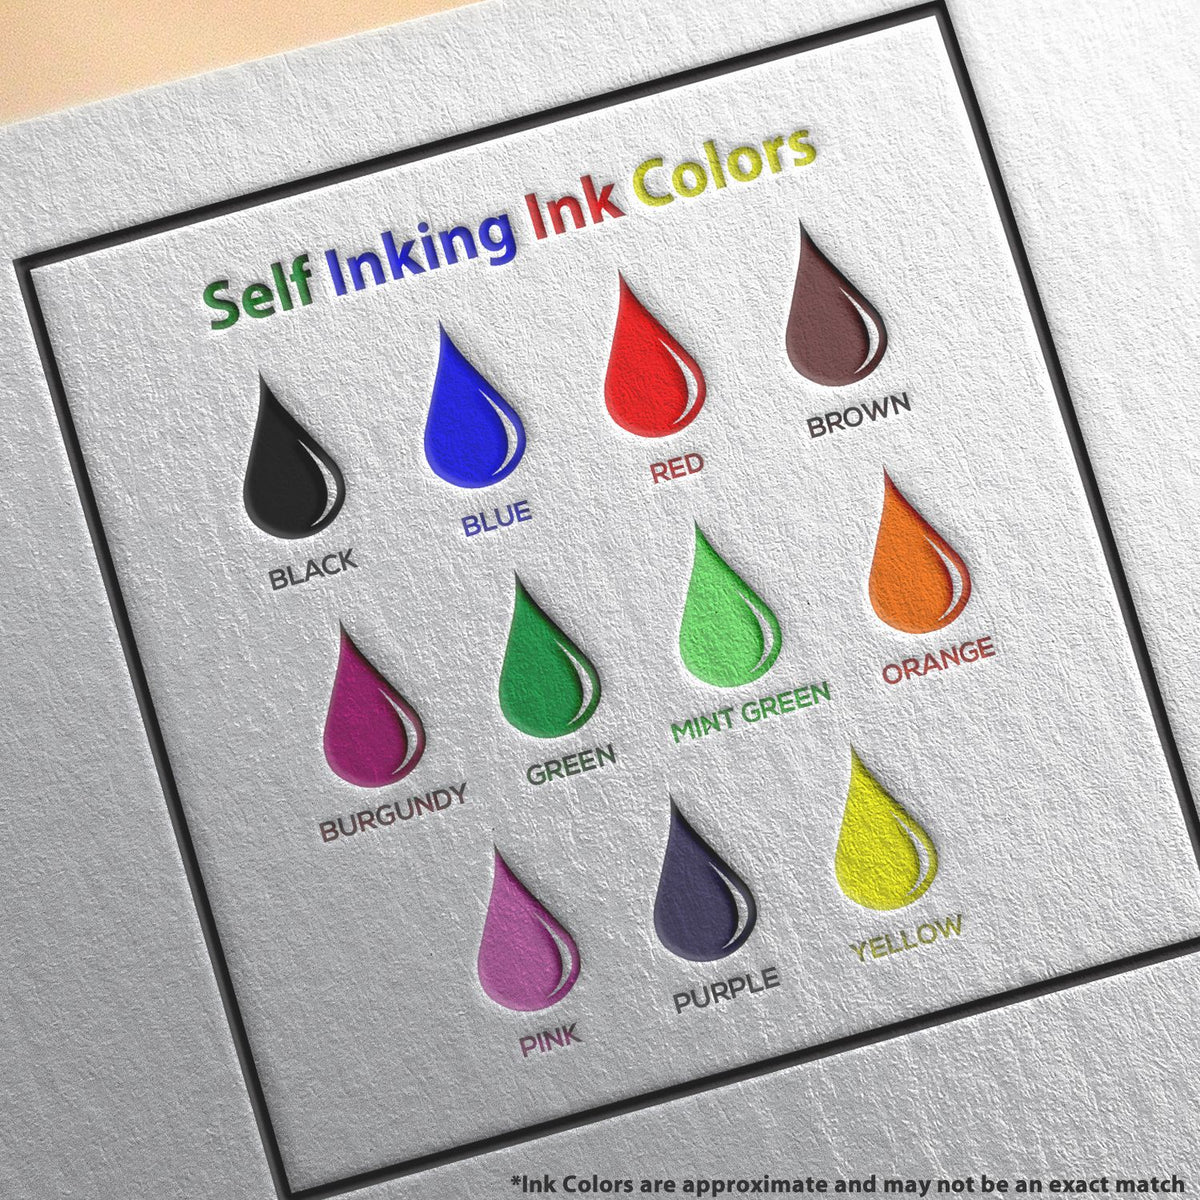 A picture showing the different ink colors or hues available for the Self-Inking Guam PE Stamp product.